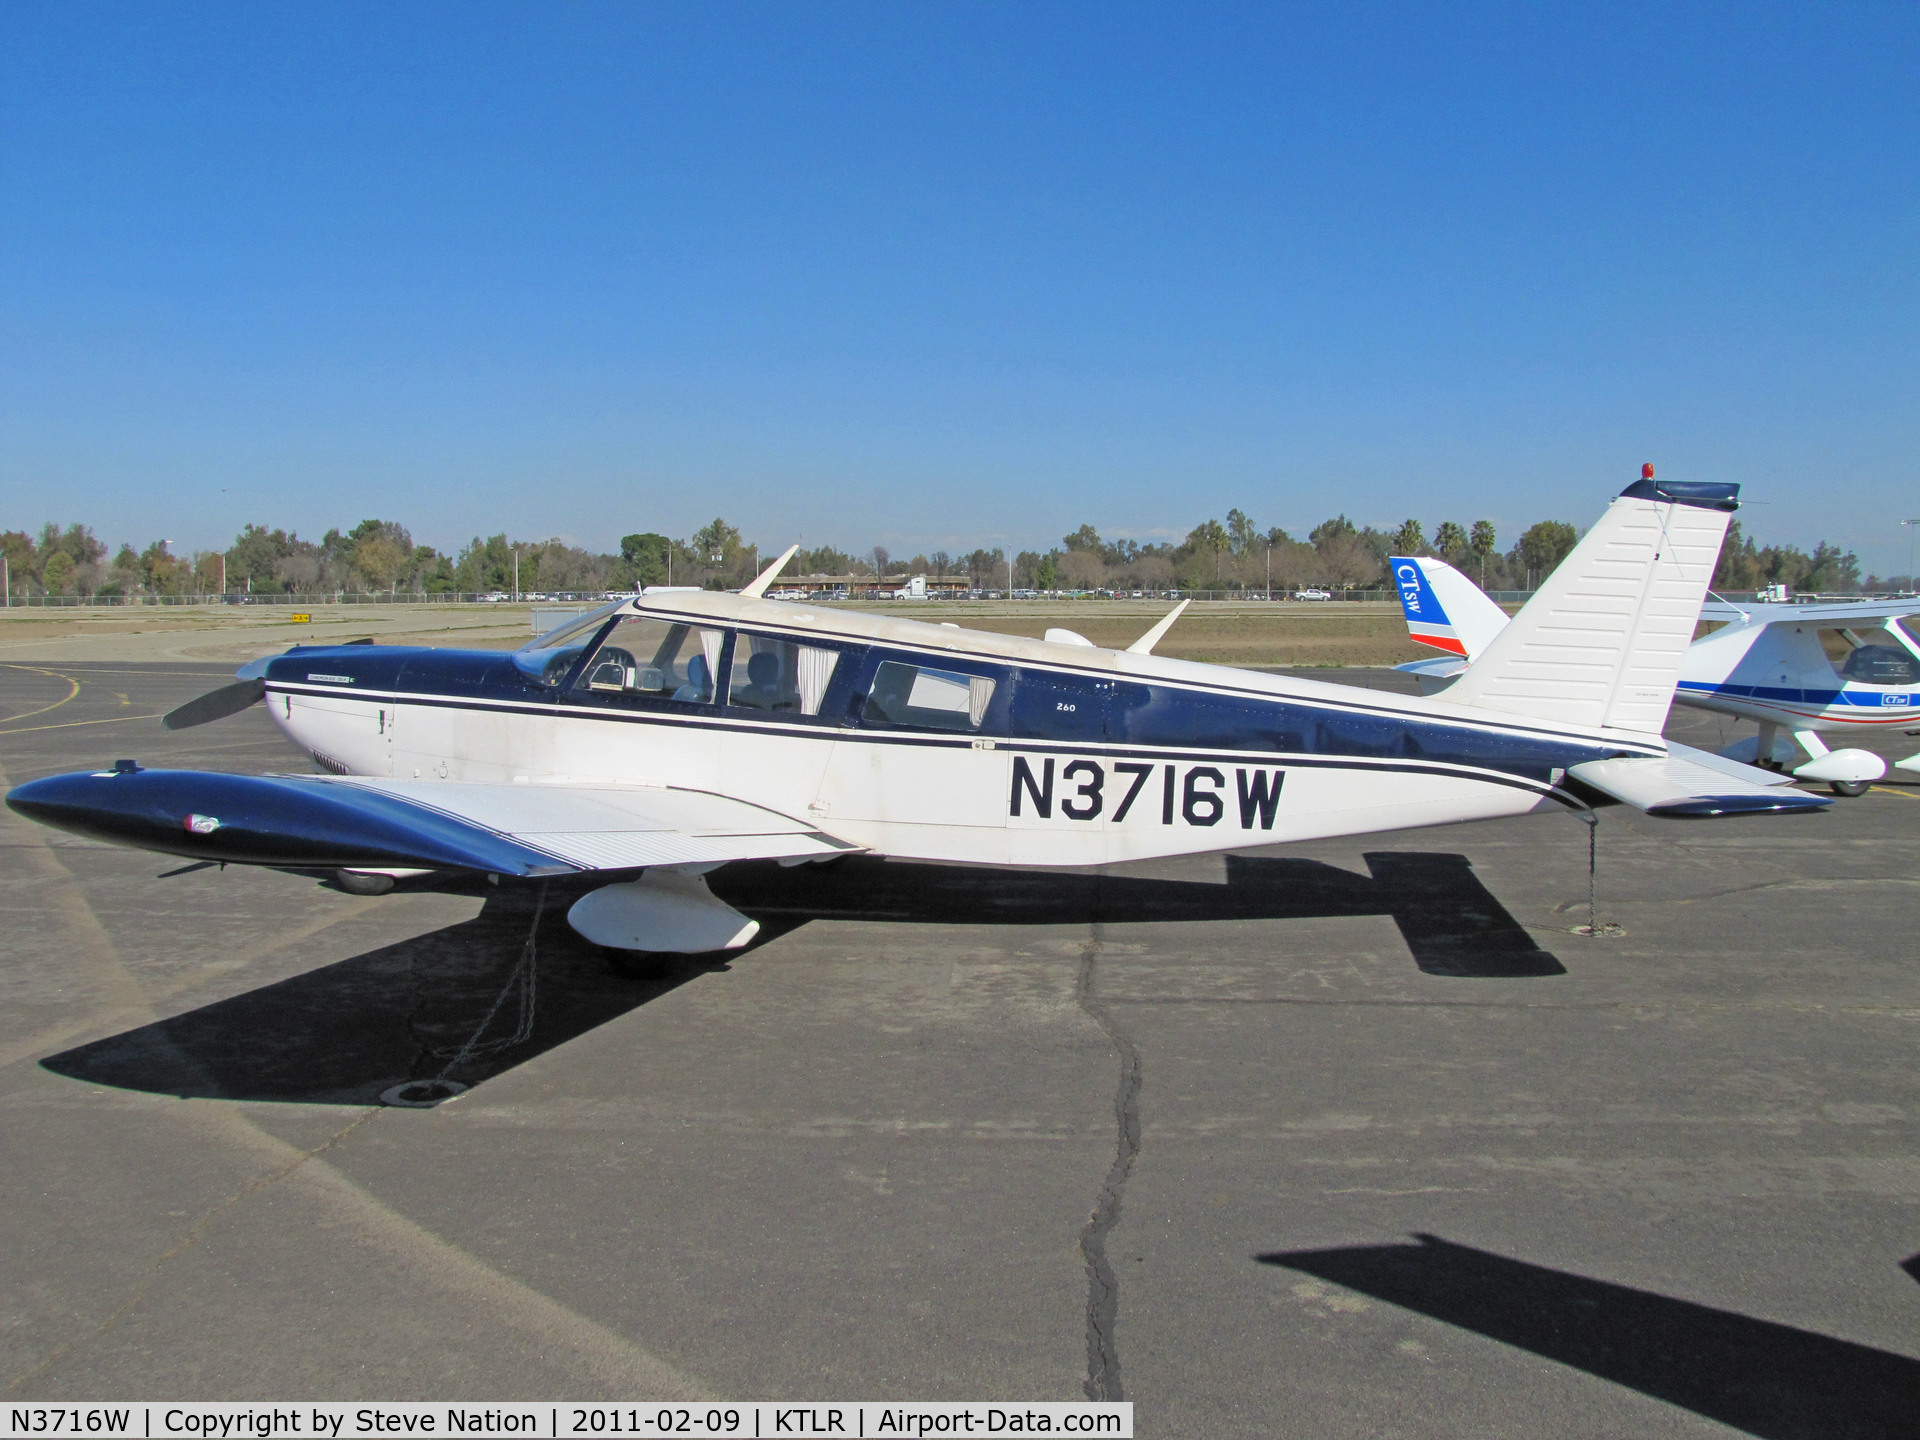 N3716W, 1966 Piper PA-32-260 Cherokee Six C/N 32-629, 1966 Piper PA-32-260 photographed @ Tulare, CA